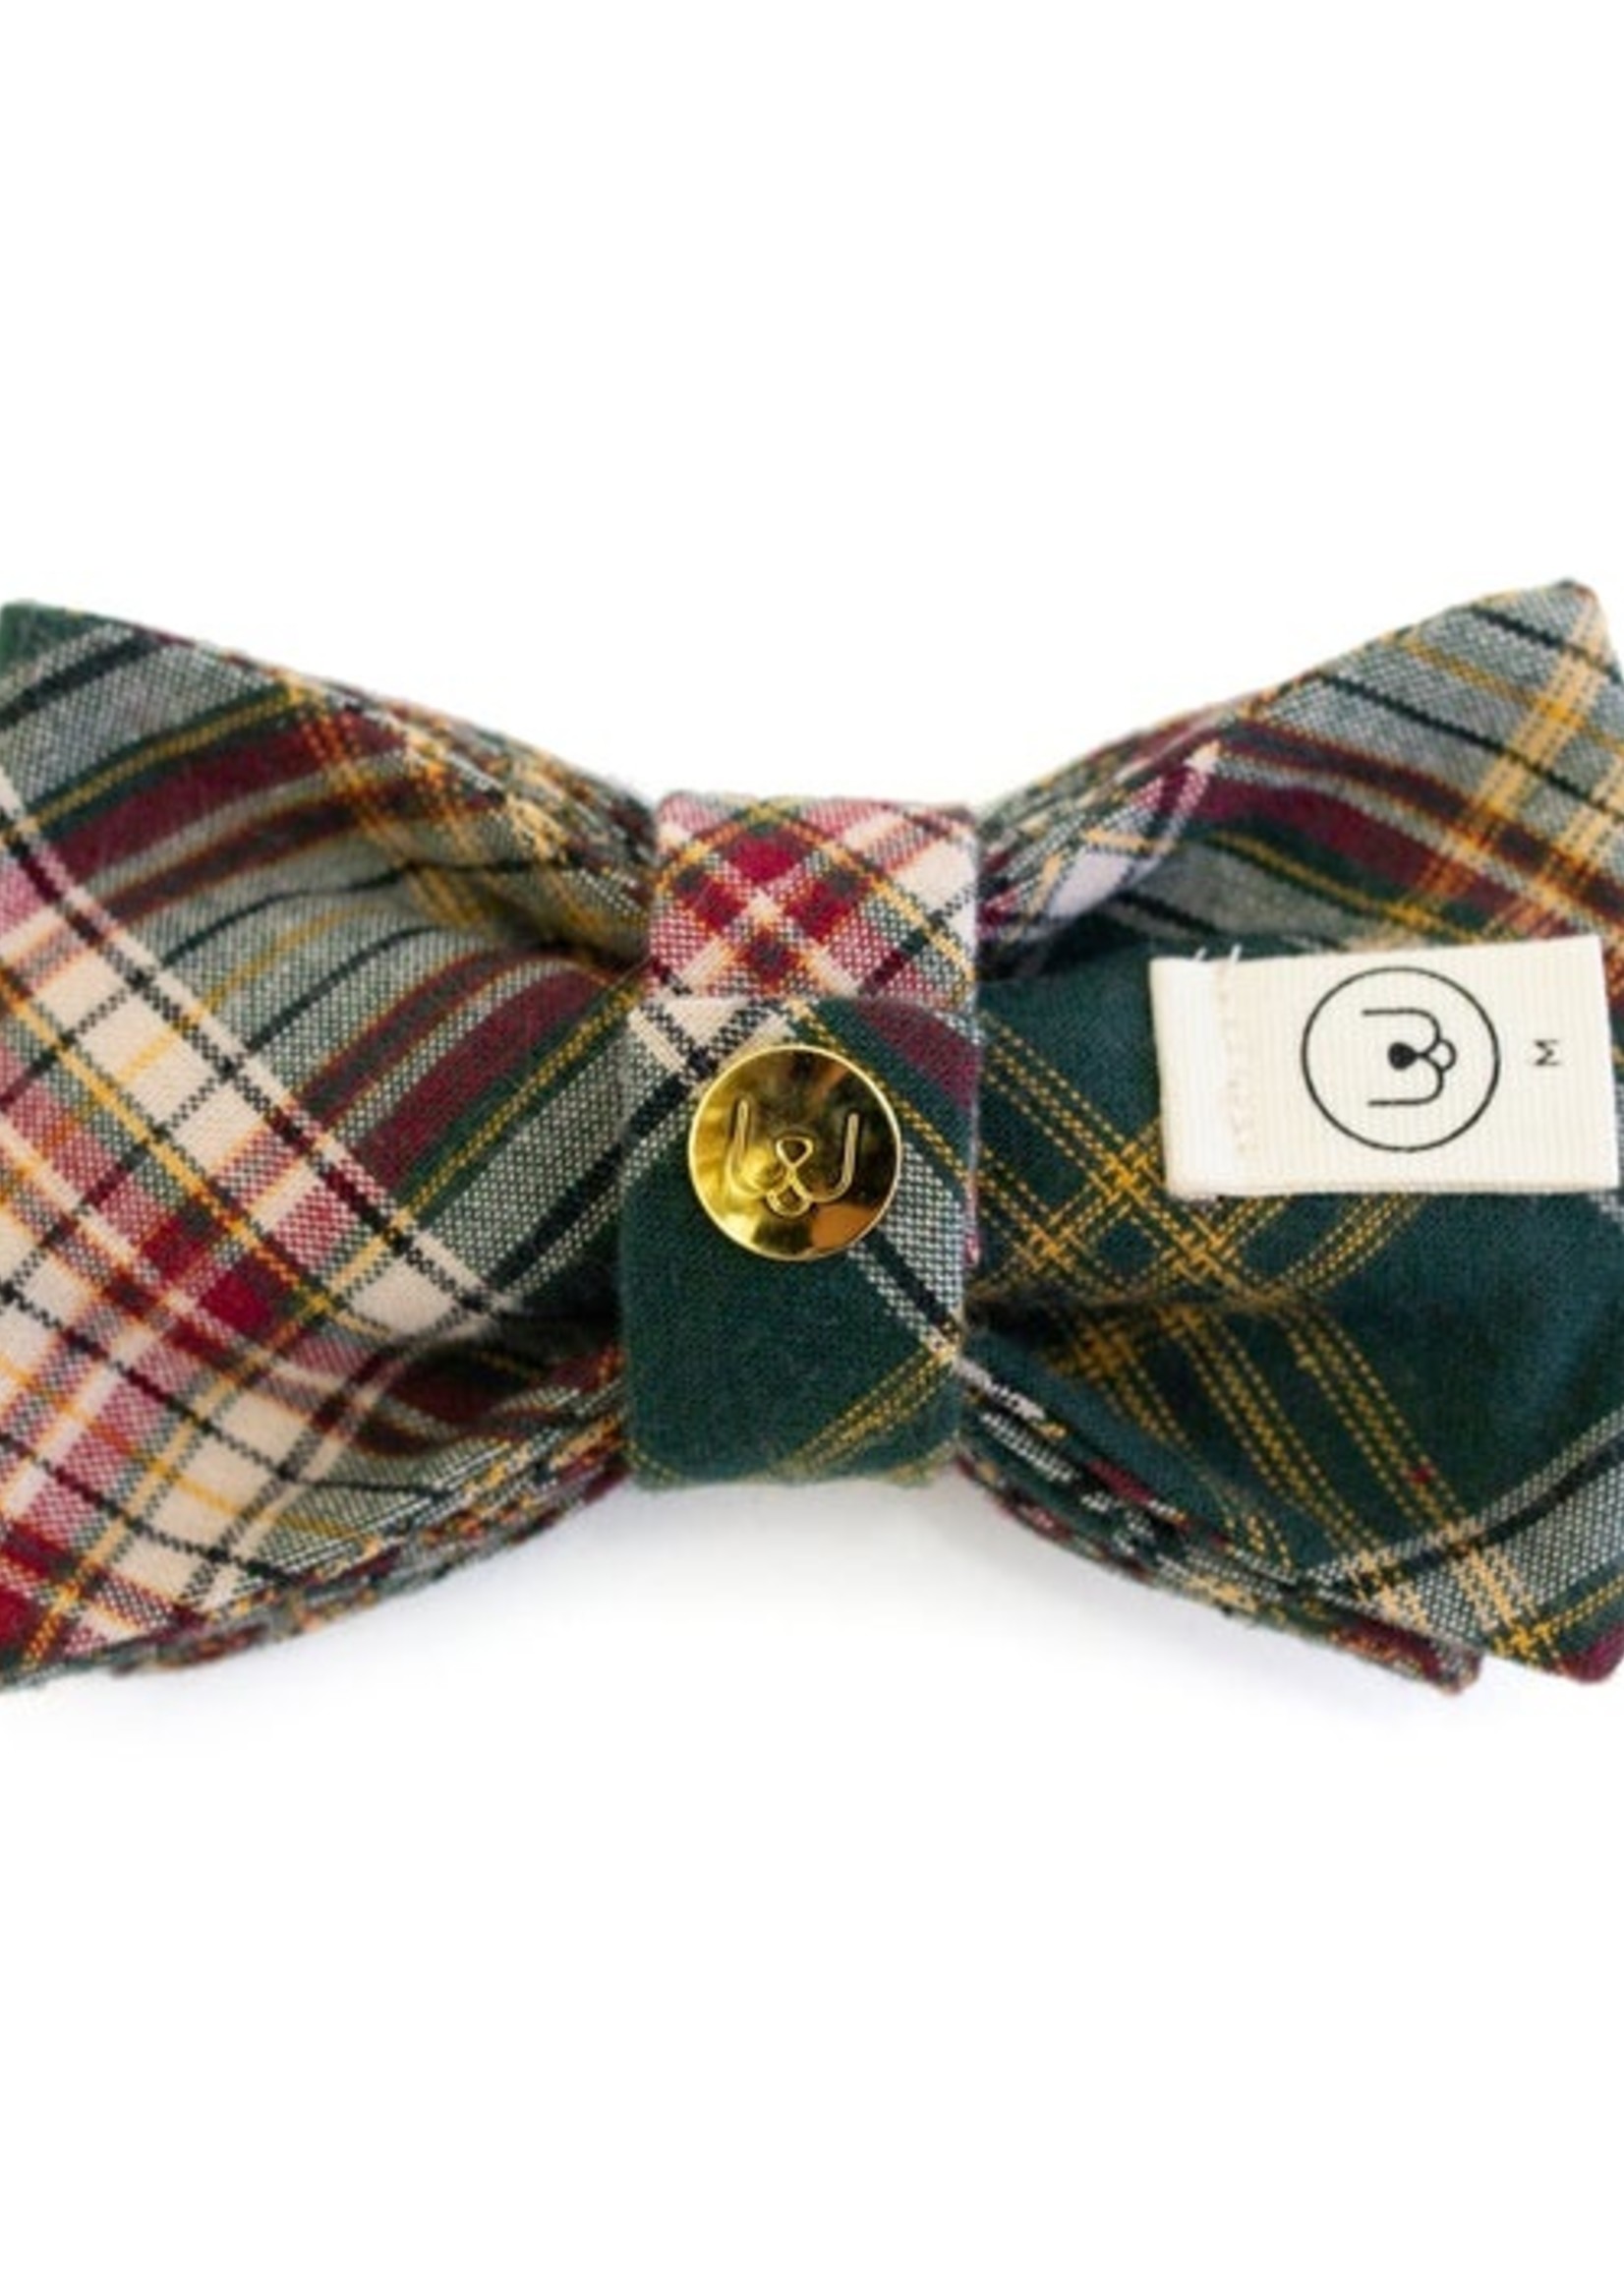 Eat Play Wag Eat Play Wag - Pine Bow Tie